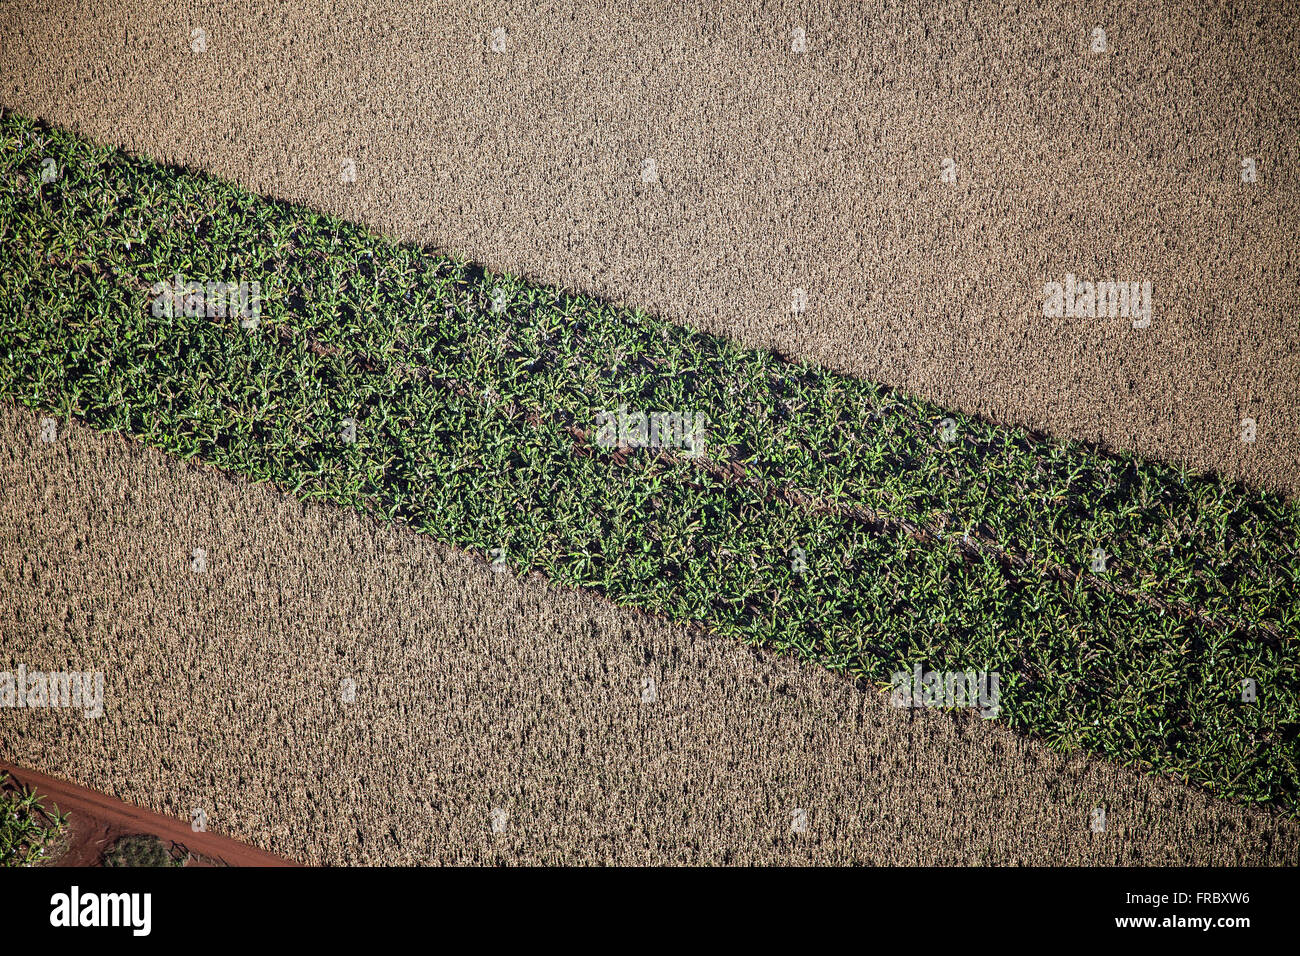 Aerial view of planting corn and bananas Stock Photo